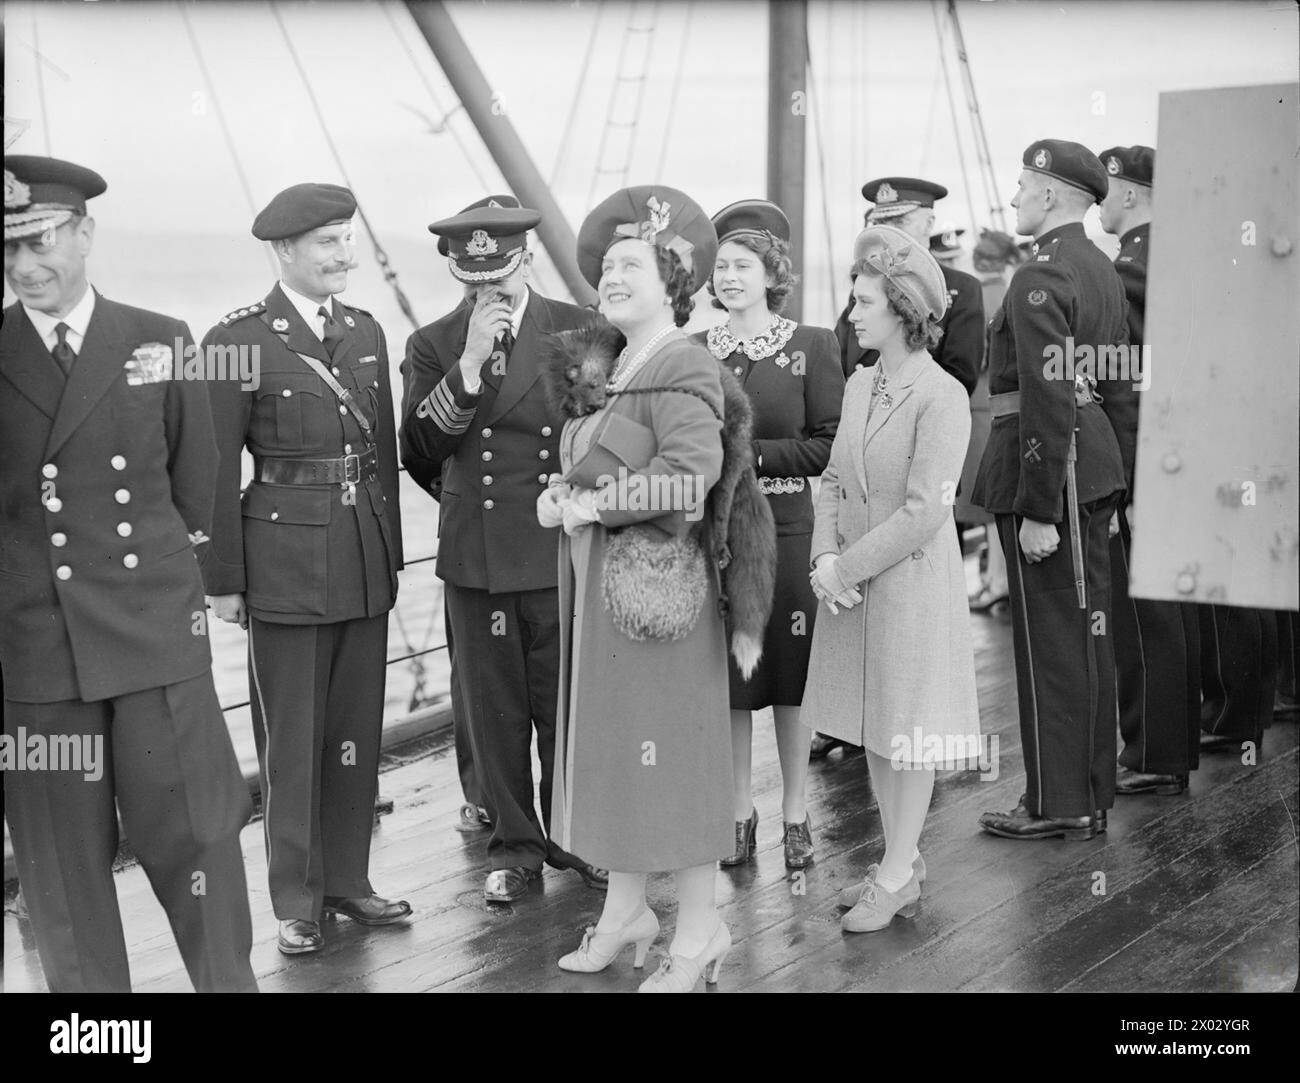 ROYAL VISIT TO HMS KING GEORGE V. 29 OCTOBER 1944, GREENOCK. THE KING AND QUEEN ACCOMPANIED BY PRINCESS ELIZABETH AND PRINCESS MARGARET PAID A FAREWELL VISIT TO THE BATTLESHIP HMS KING GEORGE V BEFORE SHE LEFT TO JOIN BRITAIN'S EAST INDIES FLEET. - The Queen and the Princesses watching ammunition being brought on board the battleship Stock Photo